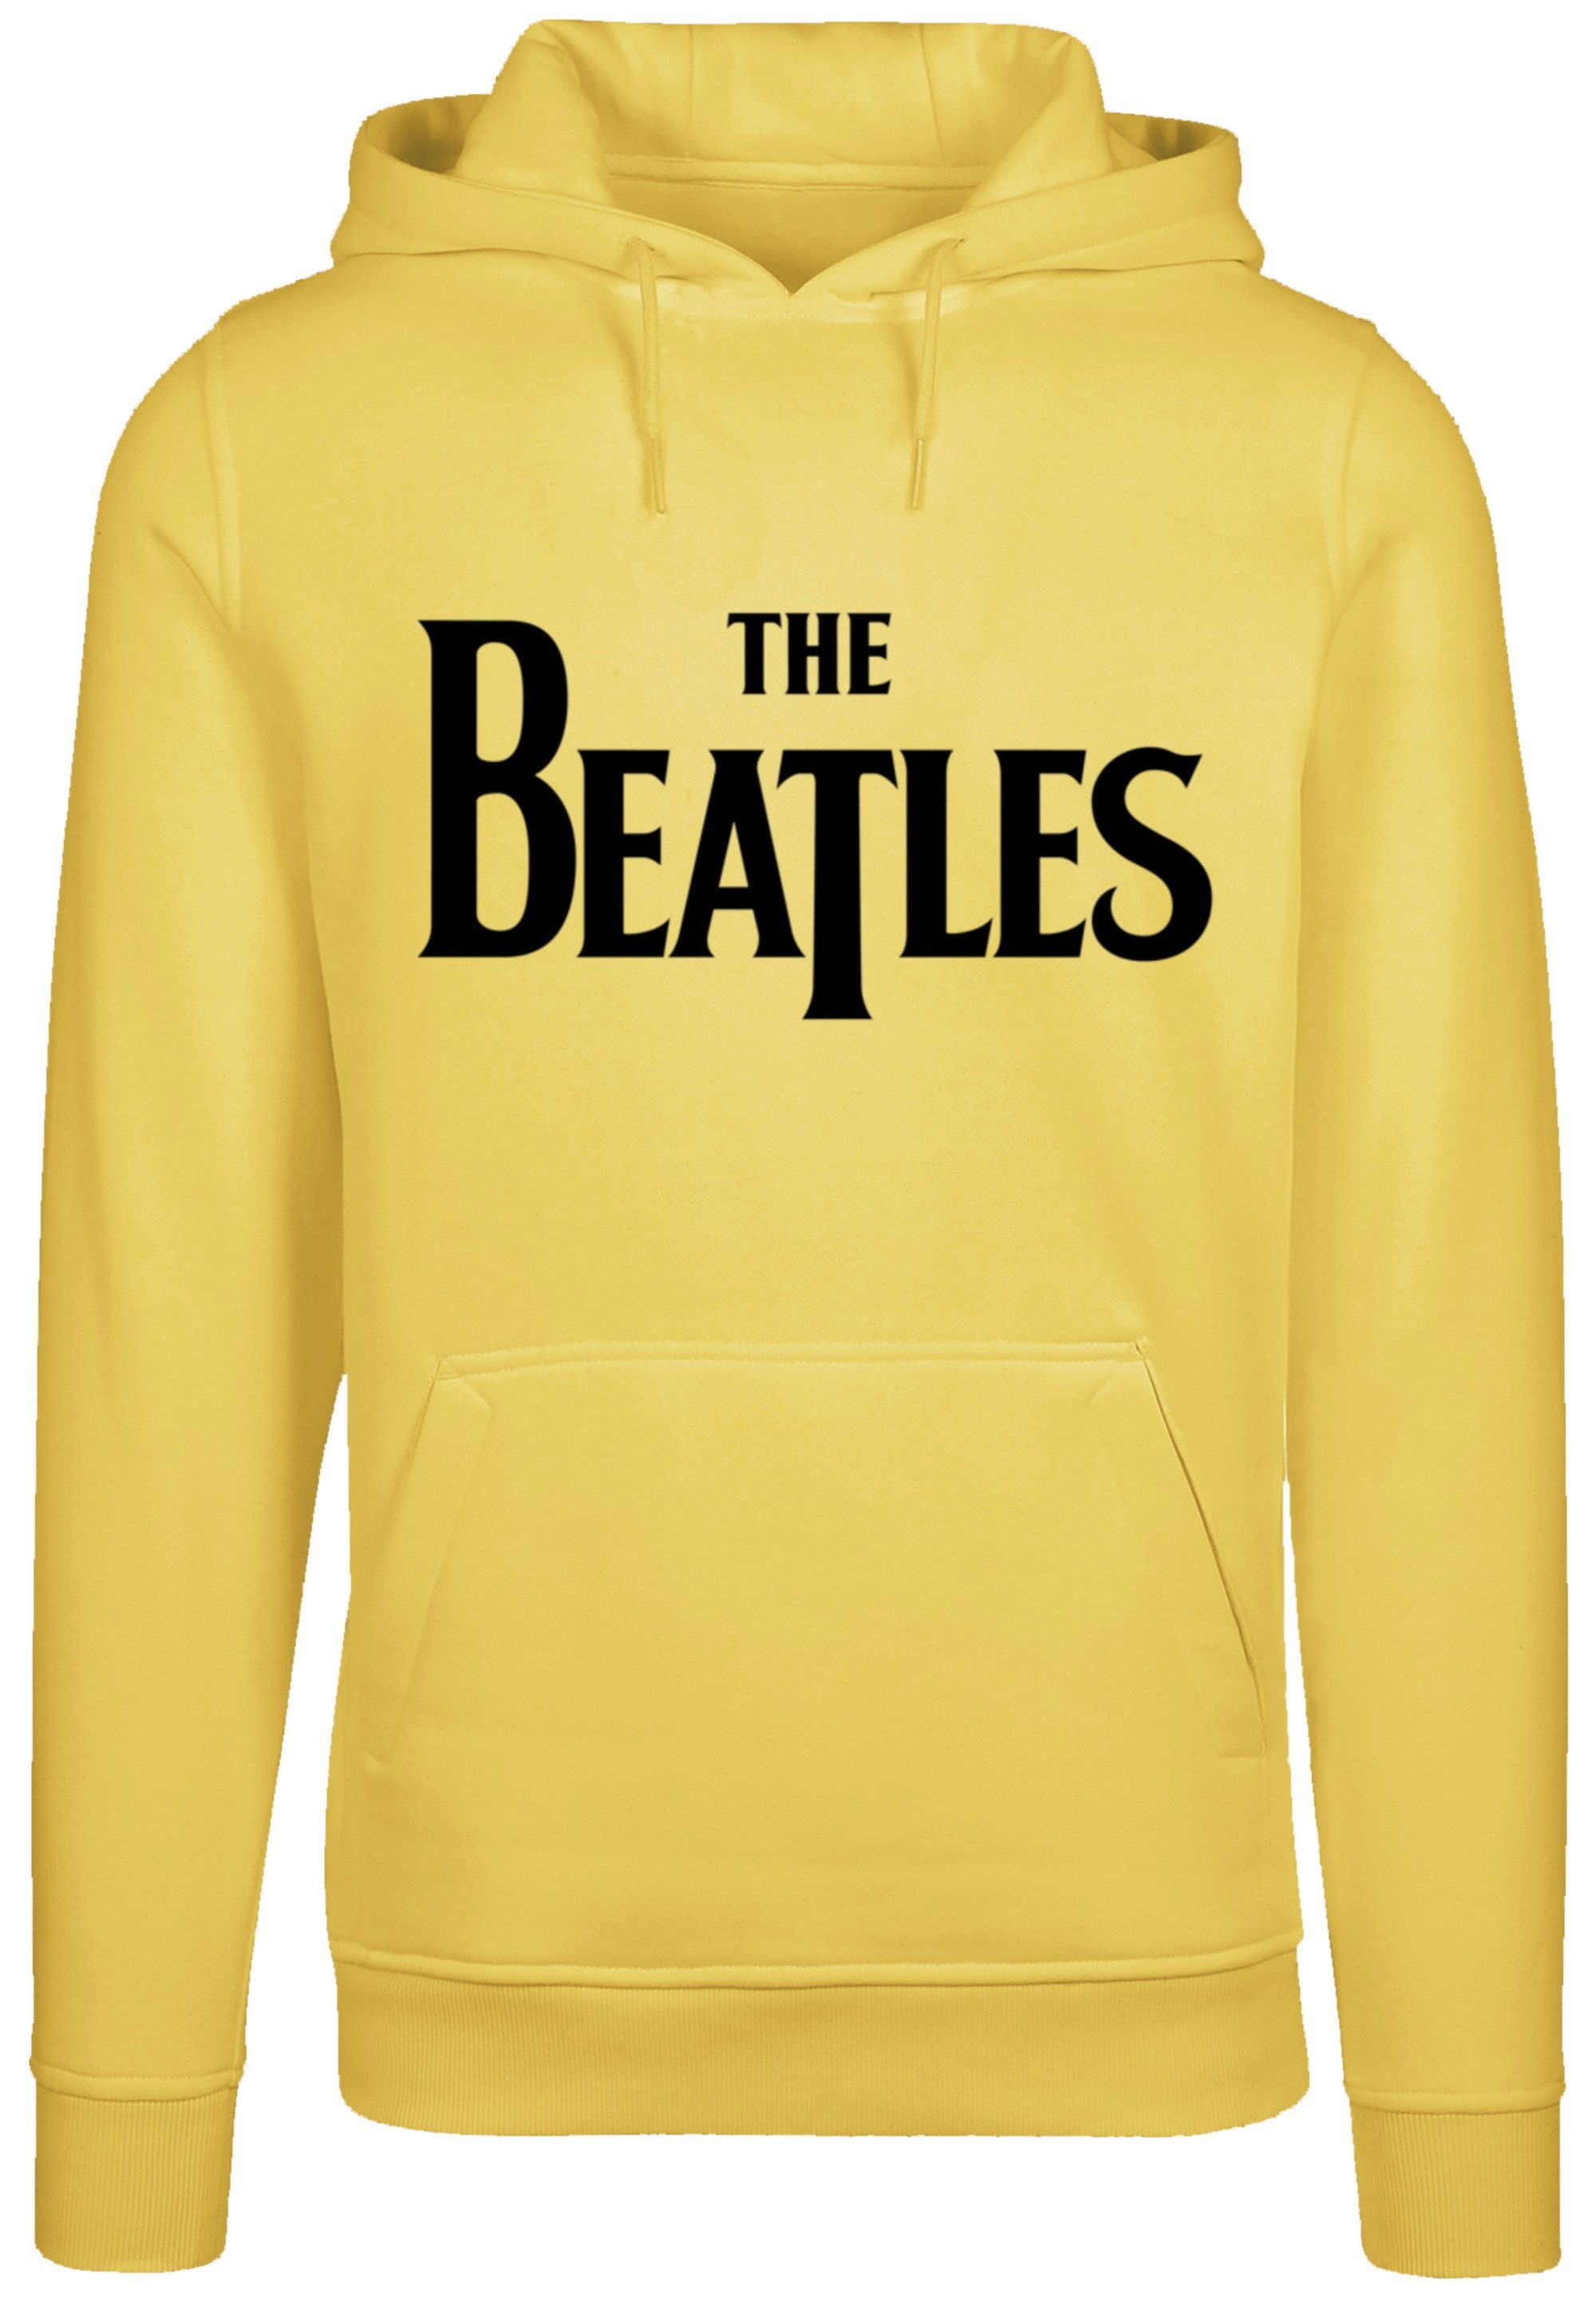 F4NT4STIC Kapuzenpullover The Beatles Drop T Logo Rock Musik Band Hoodie, Warm, Bequem taxi yellow